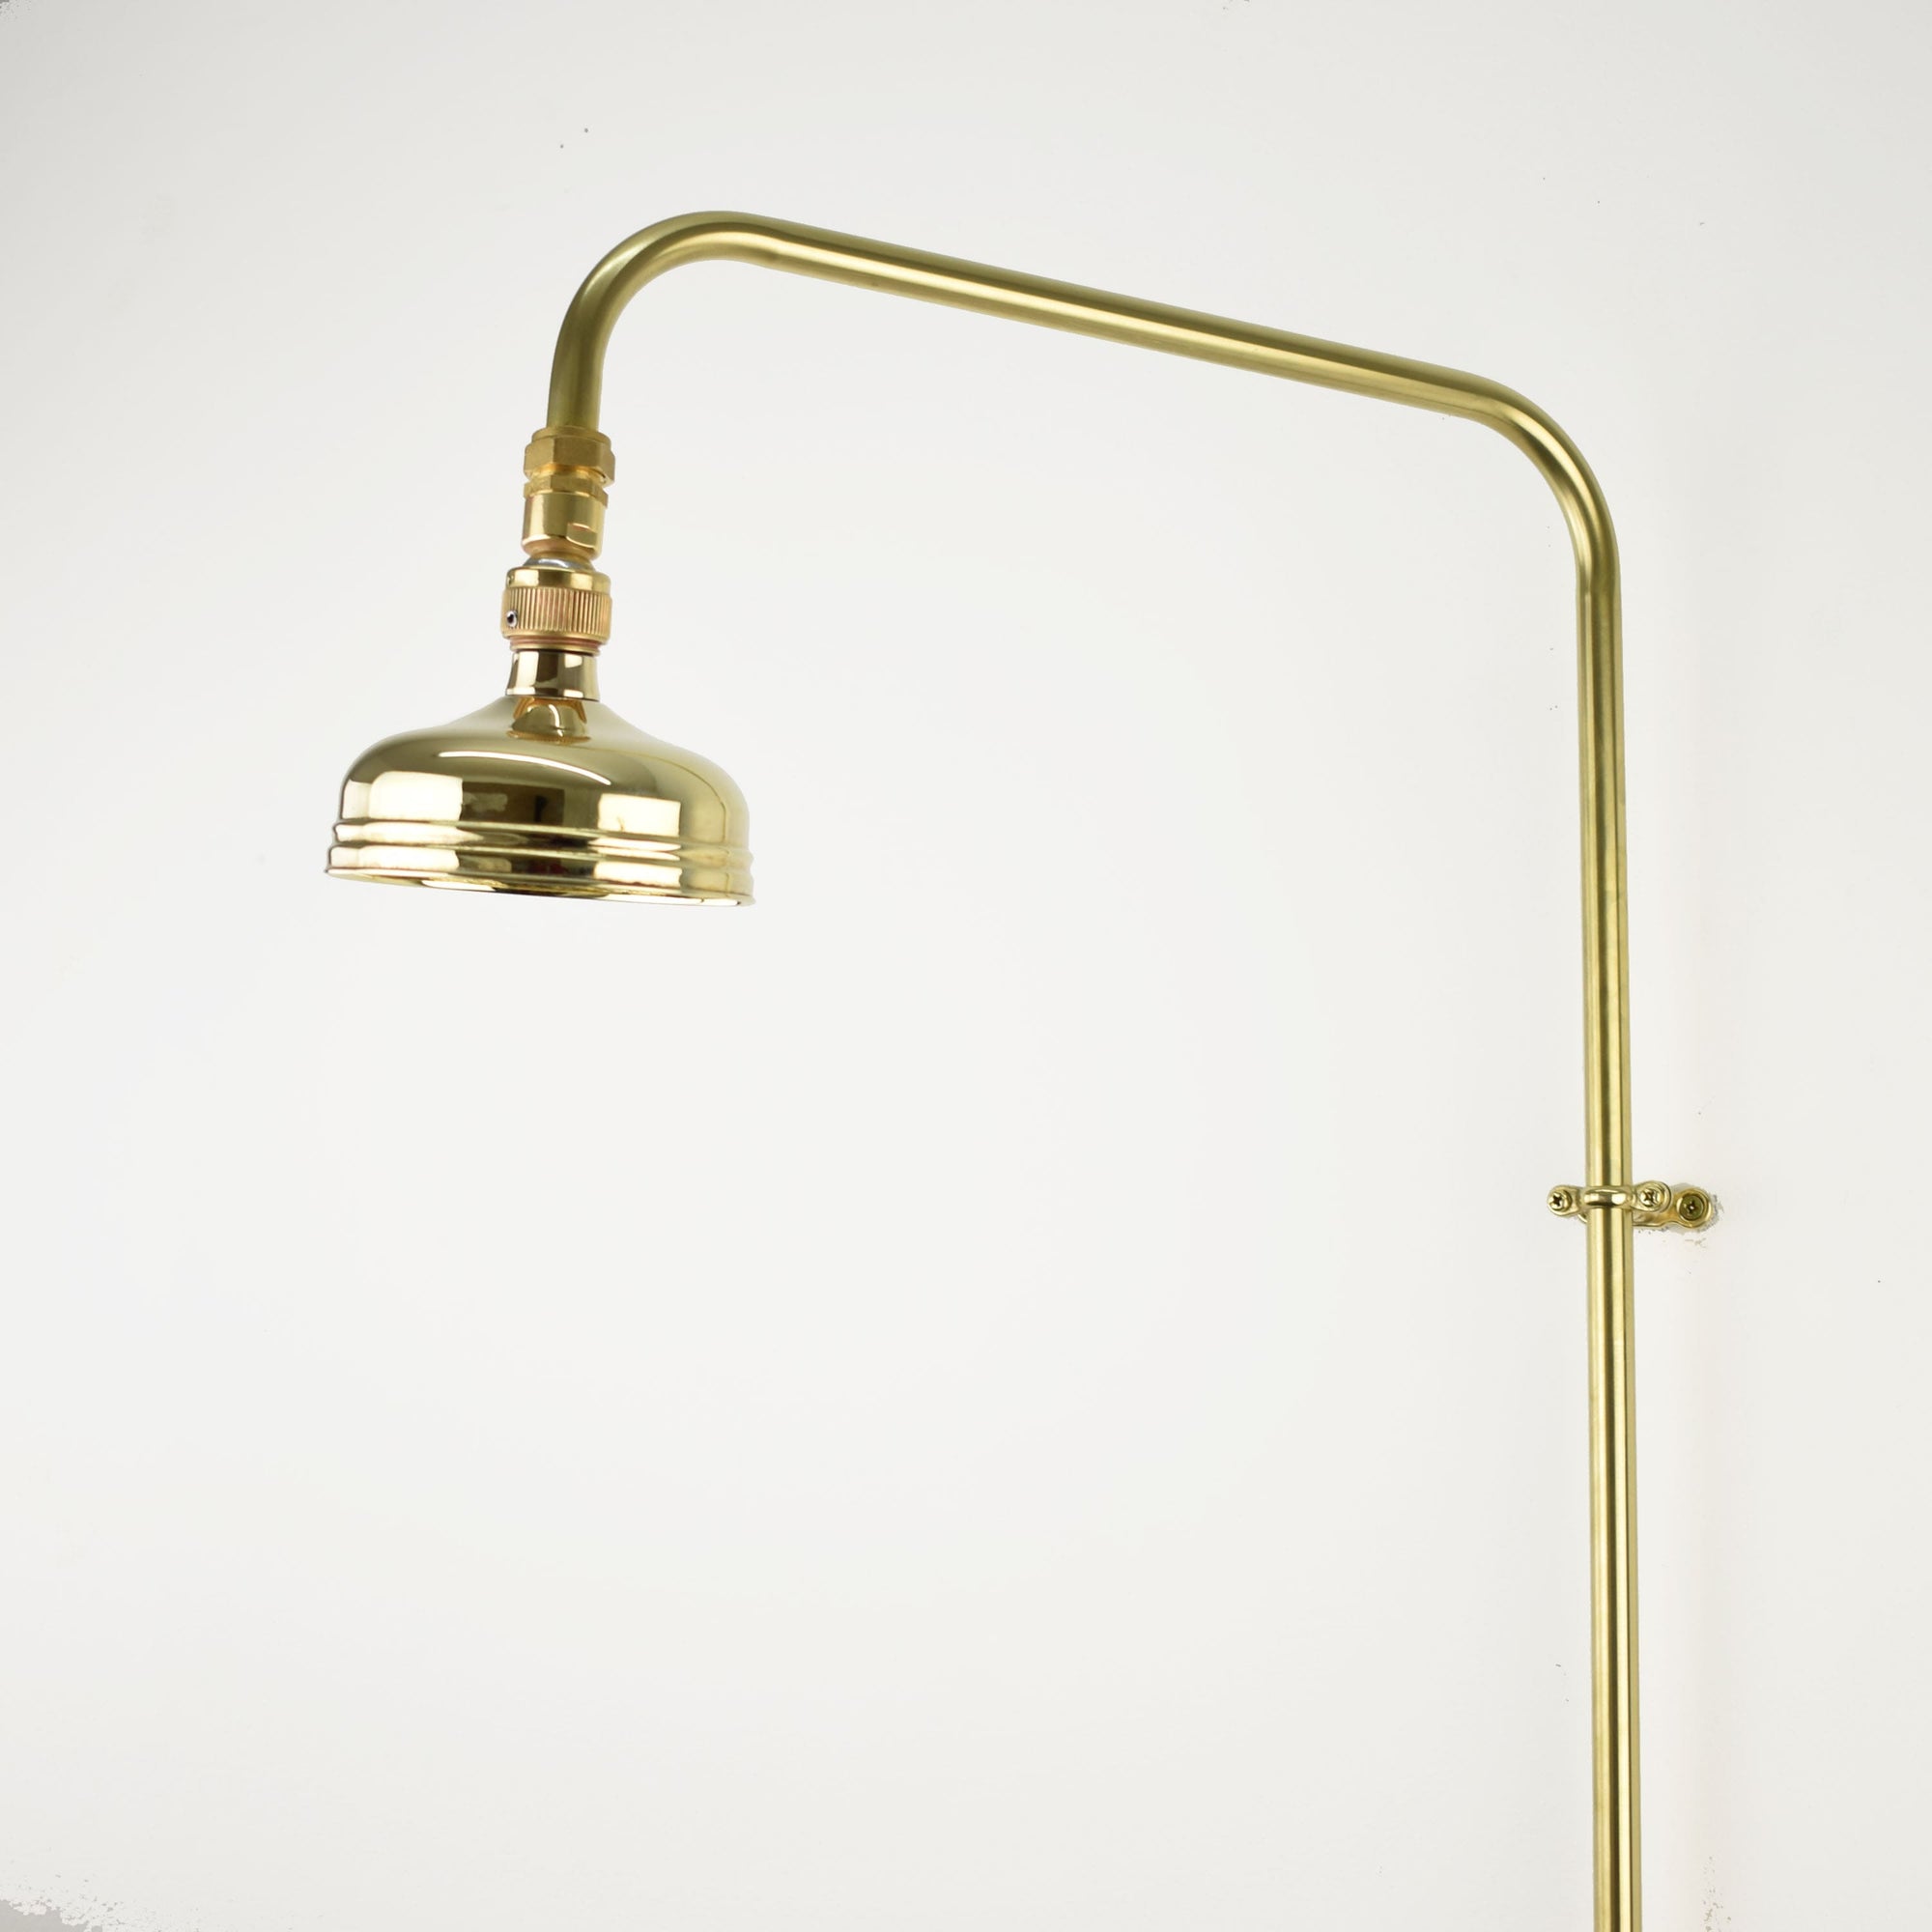 A minimalist brass shower head with a simple and elegant round design, featuring a high-pressure jet spray option